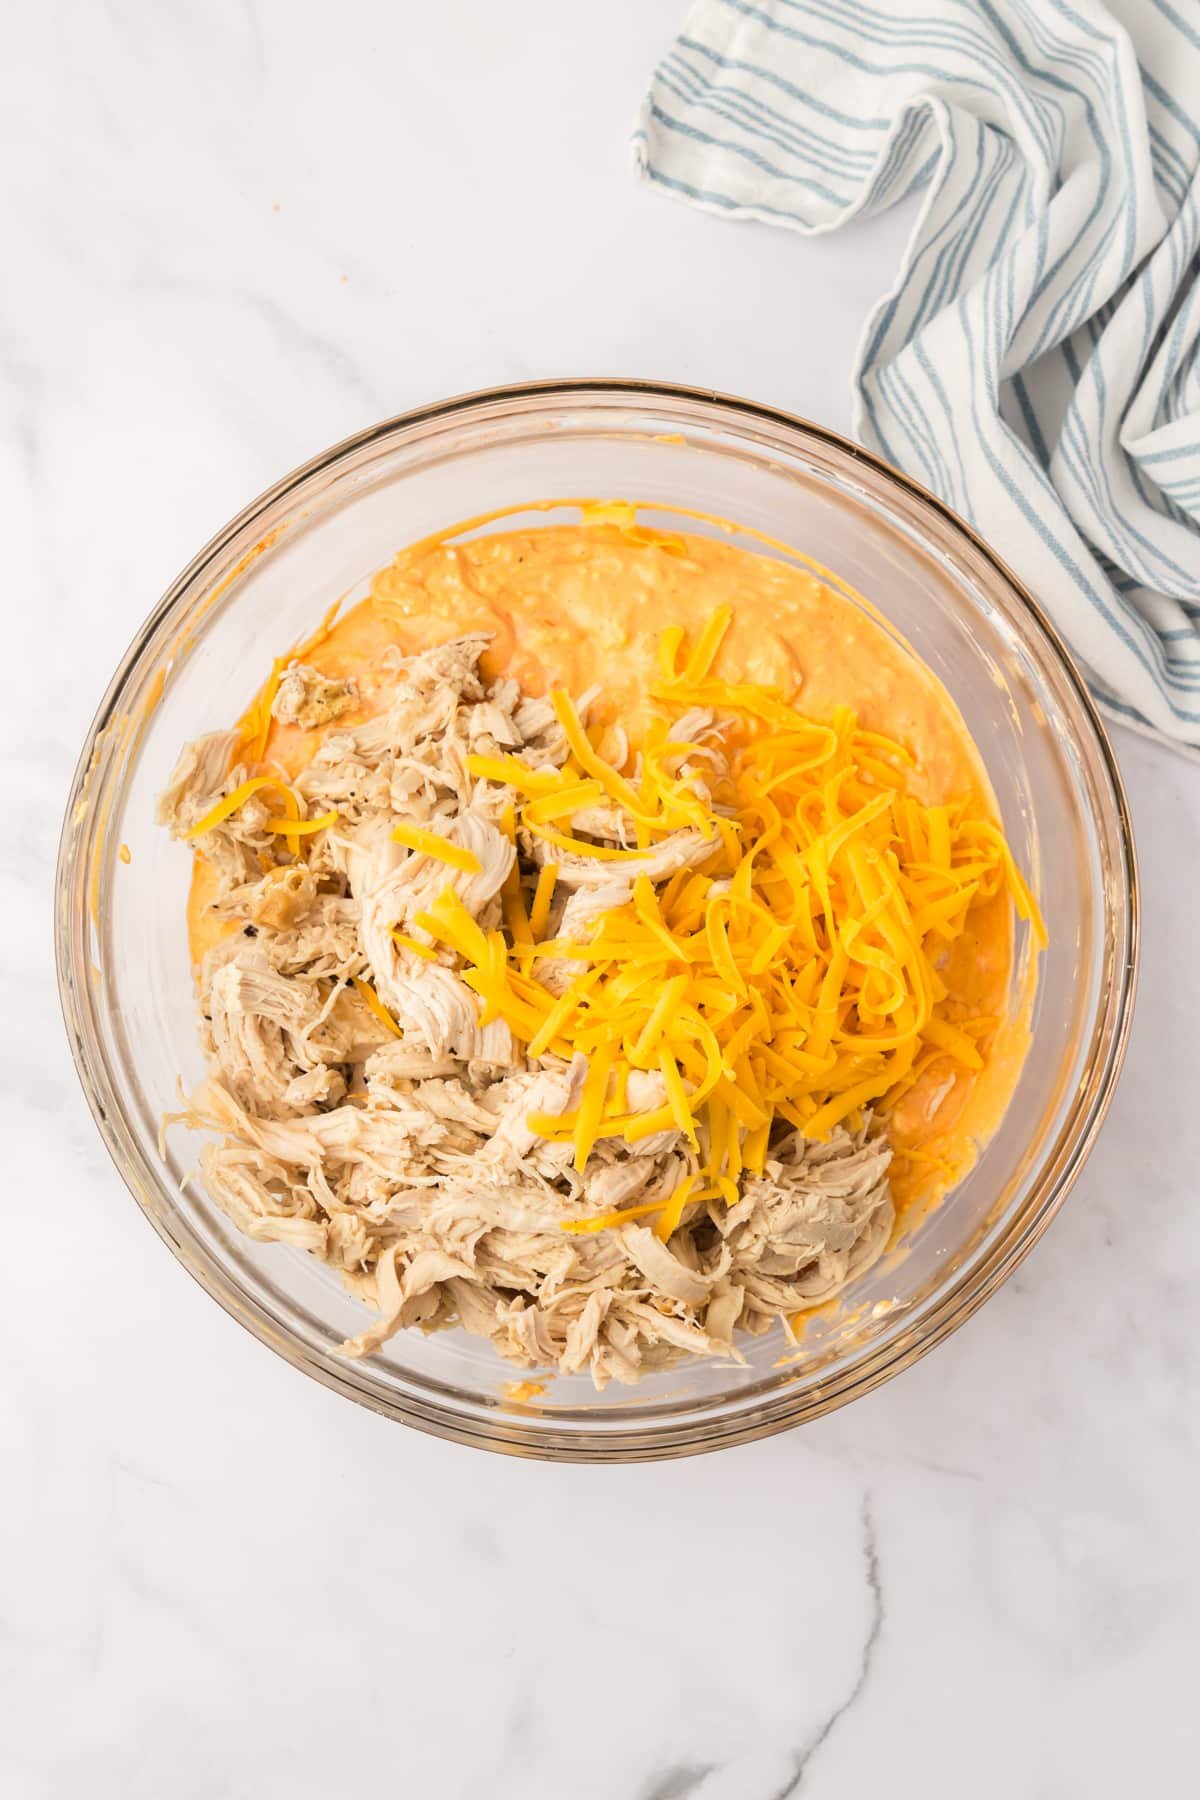 A bowl filled with a dip mixture, with shredded cheese and cooked chicken on top.